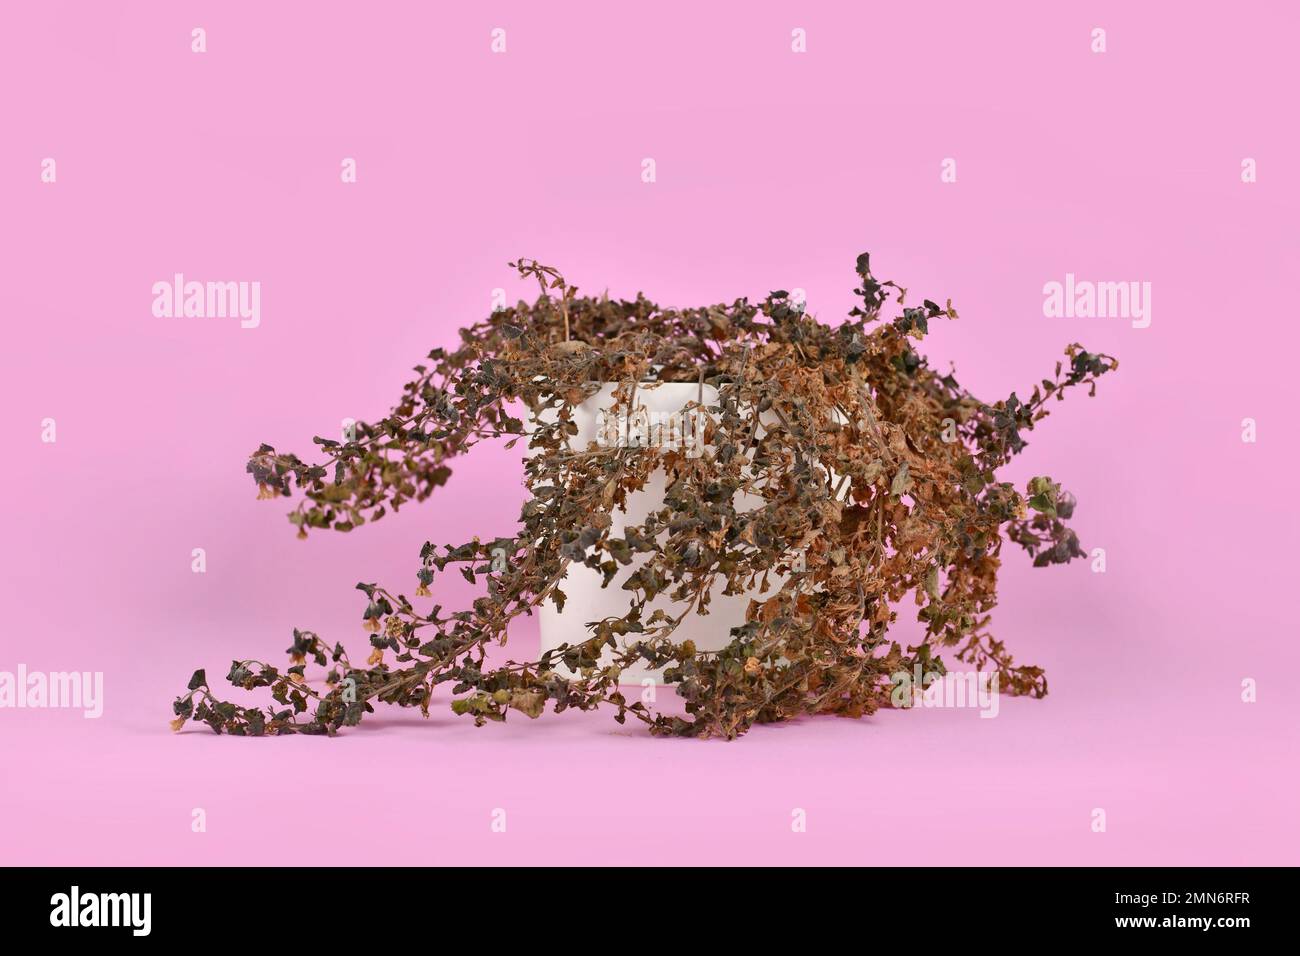 Neglected dried up Hebe plant in white flower pot on pink background Stock Photo